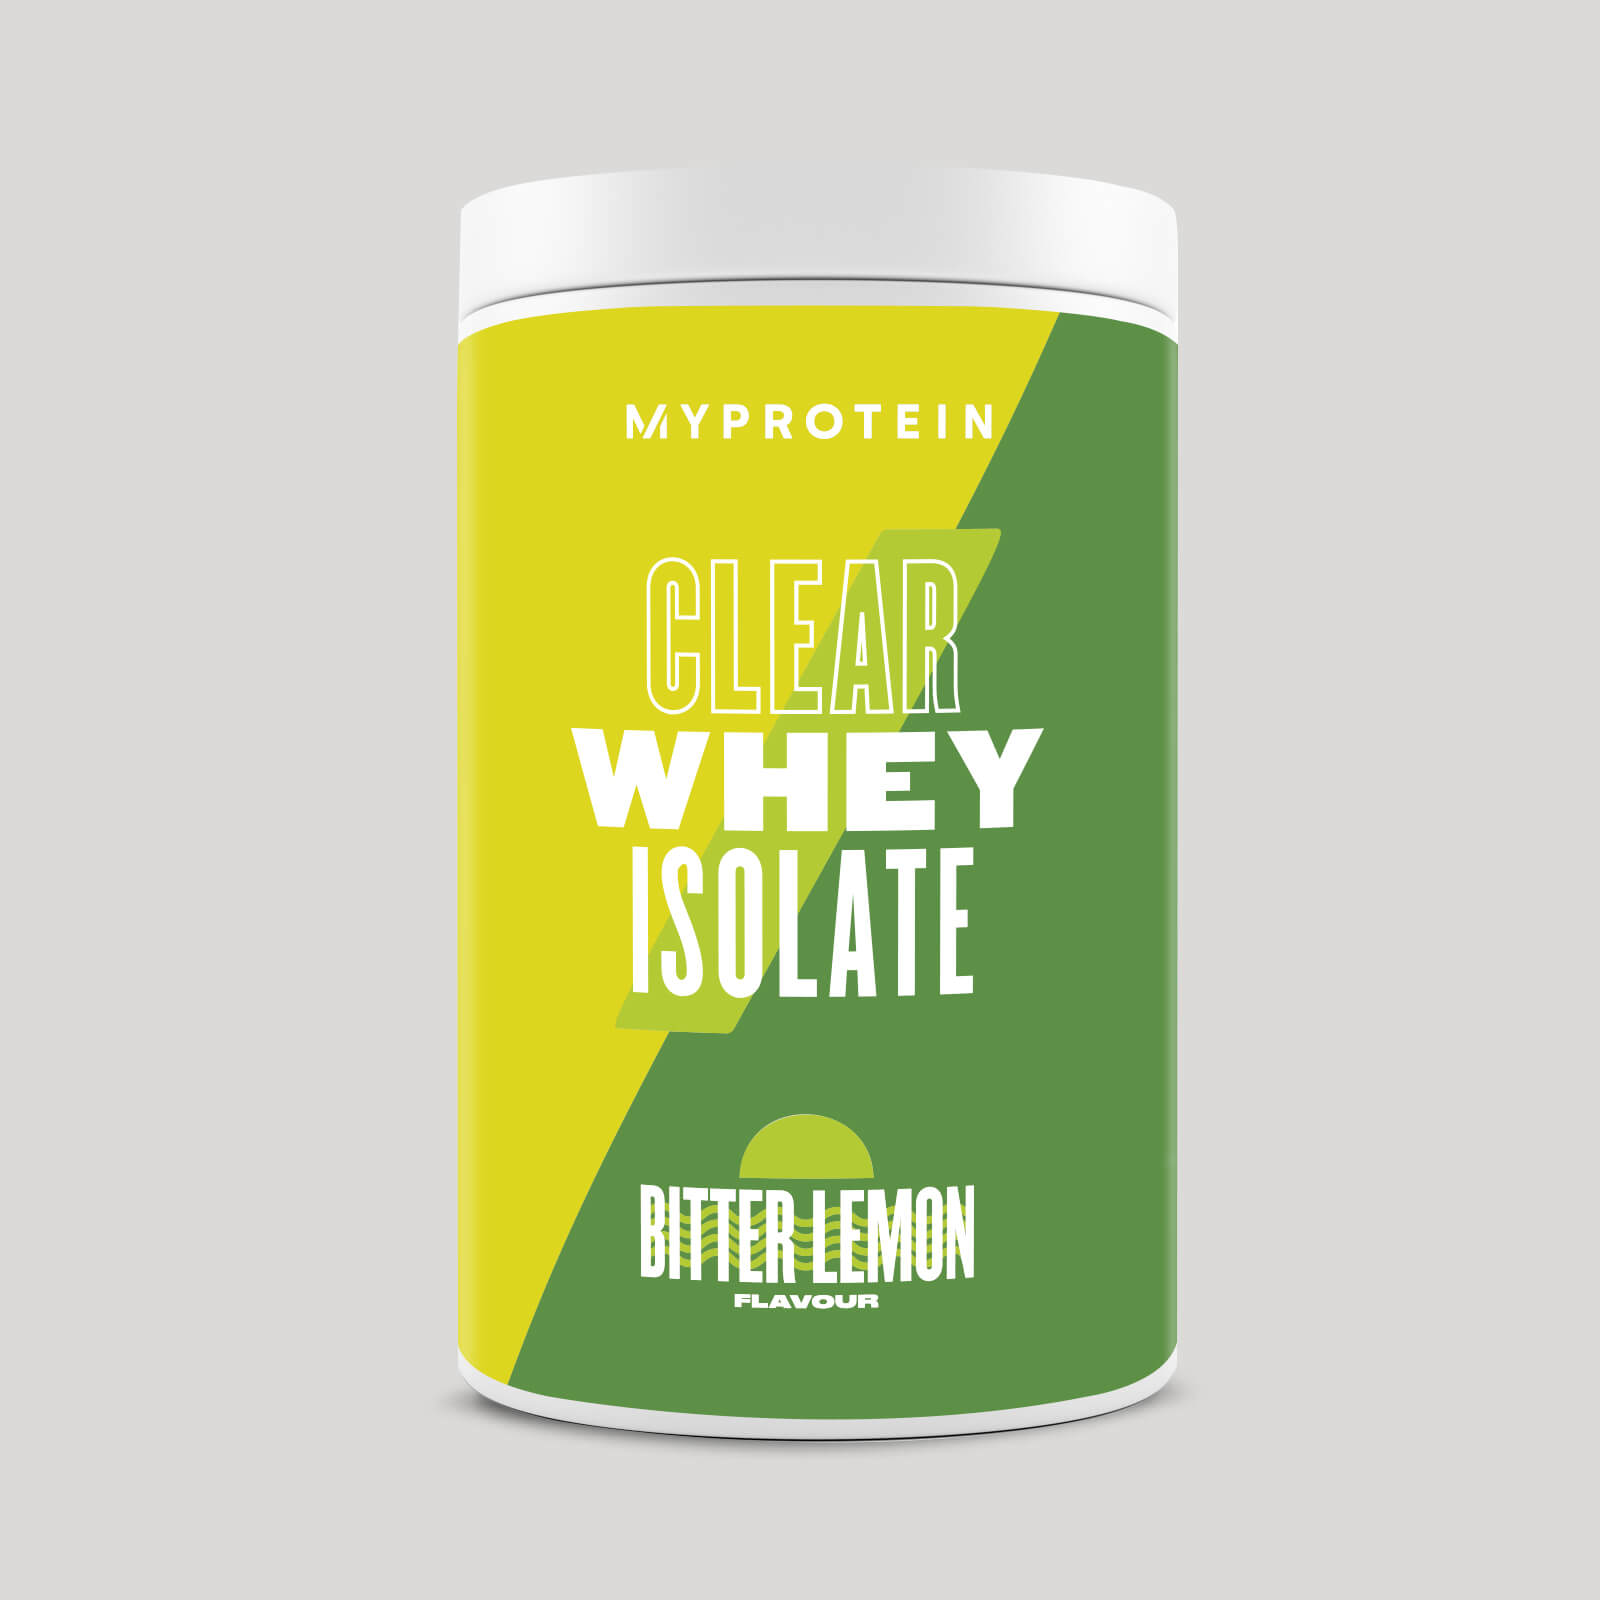 Myprotein Clear Whey Isolate - 20servings - Bitter Lemon